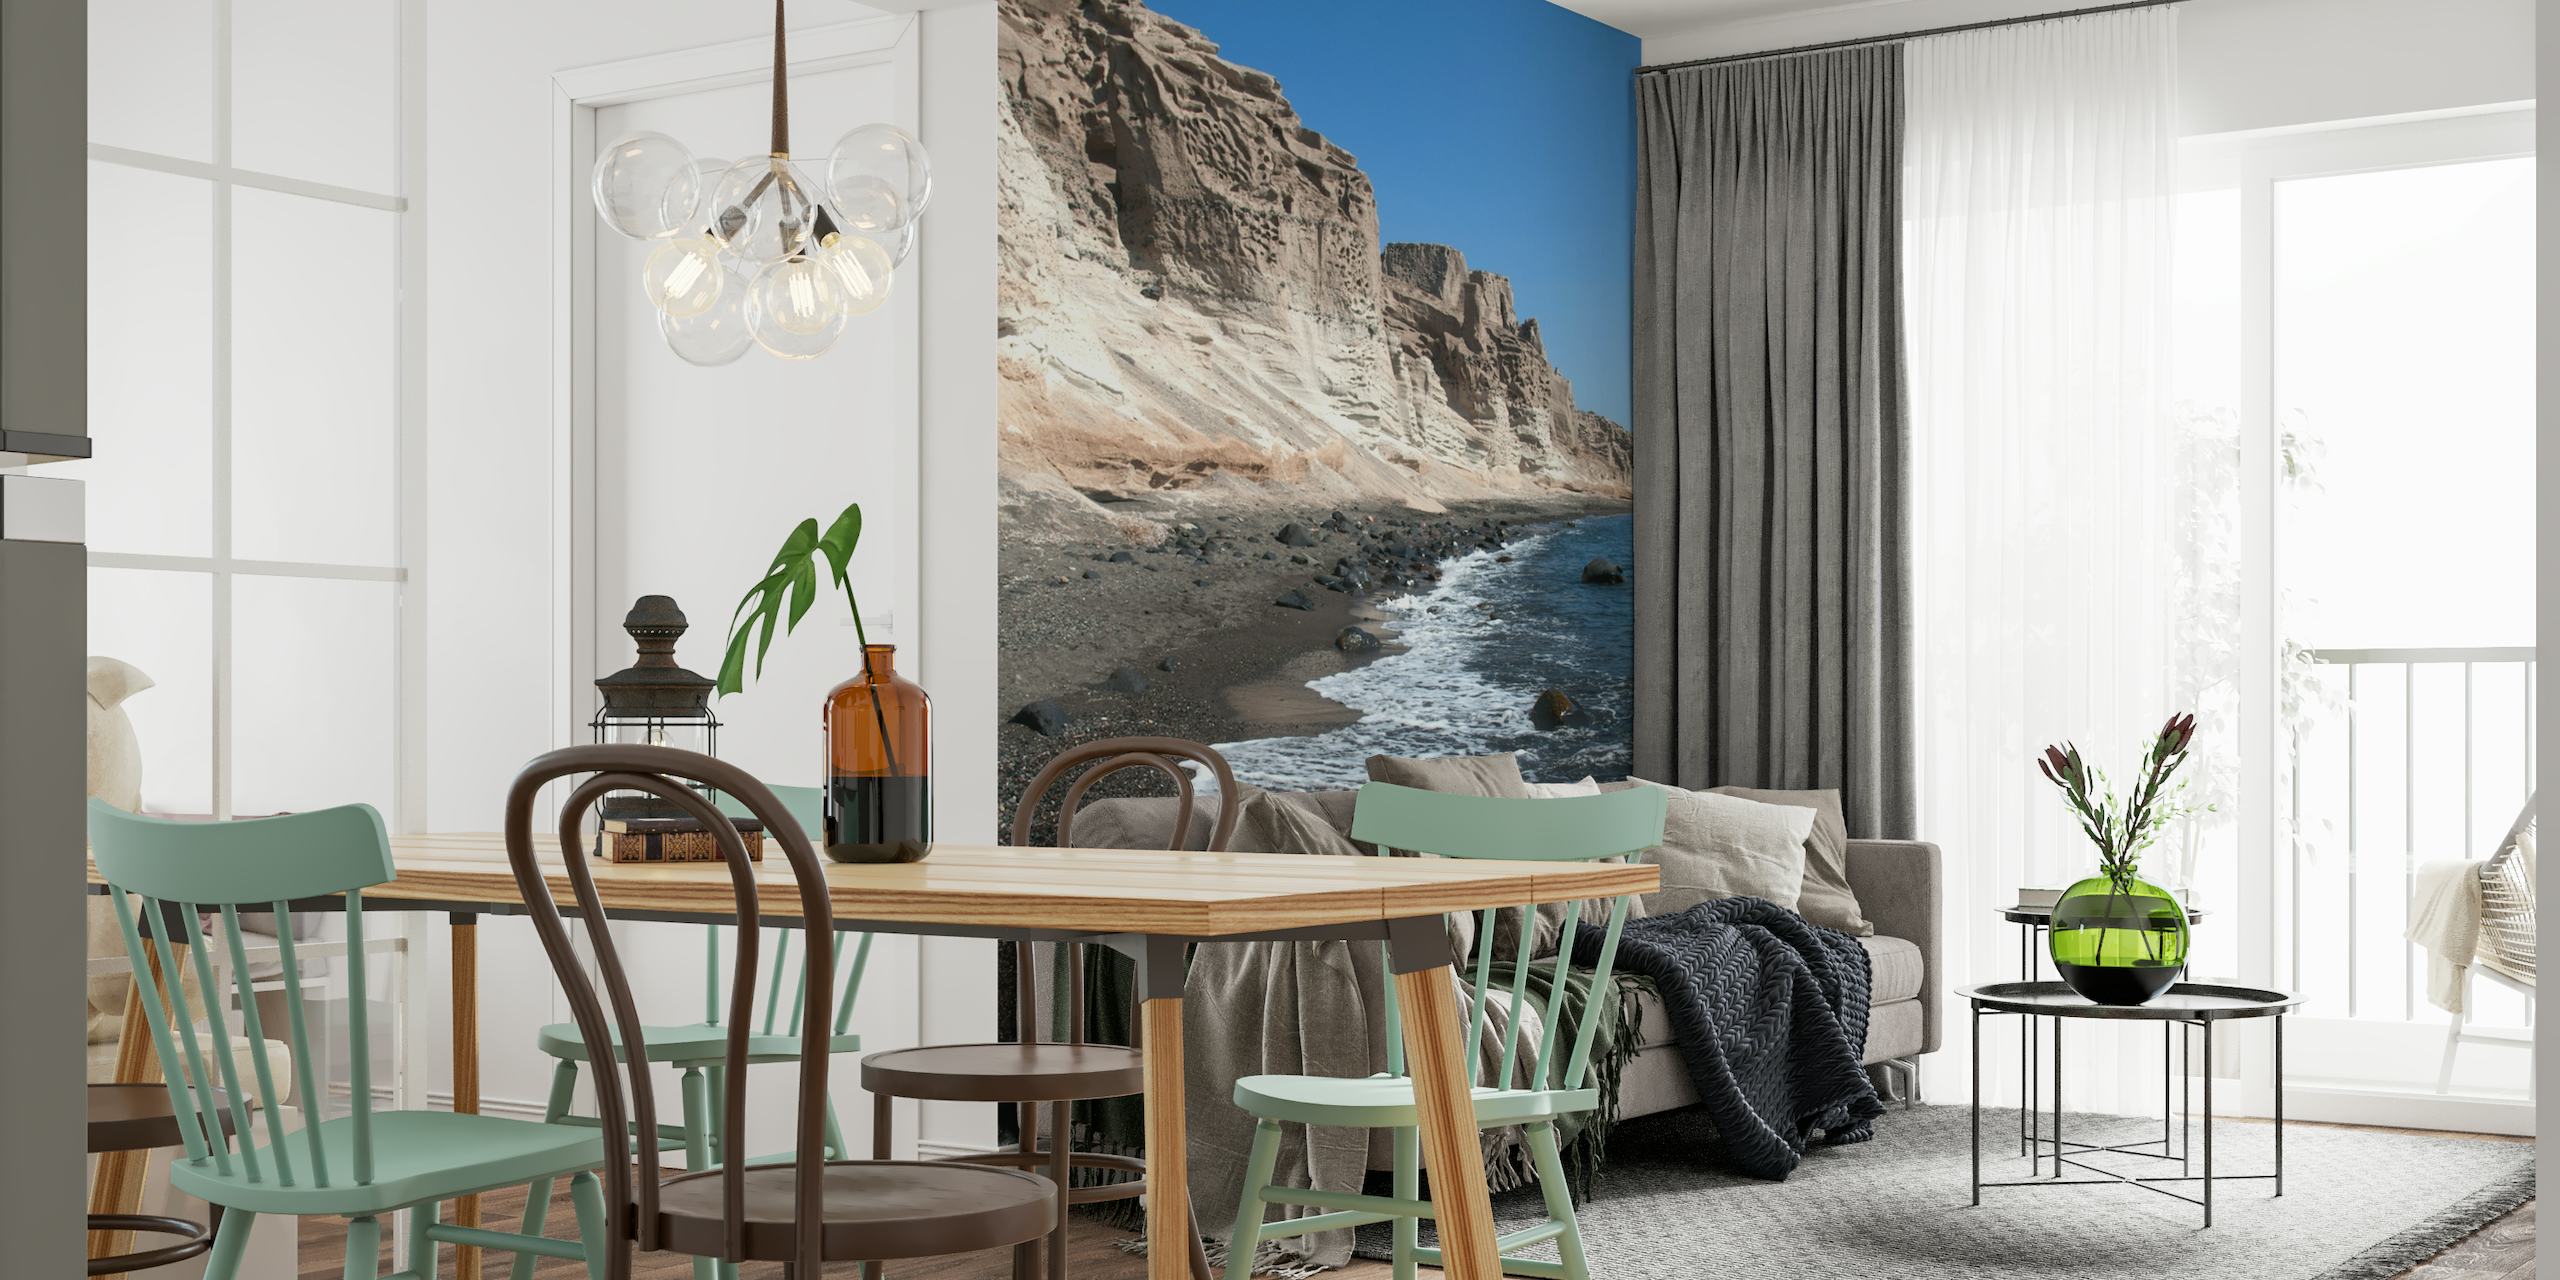 Santorini Coast wall mural depicting the Aegean seaside with a rocky shoreline and captivating blue waters